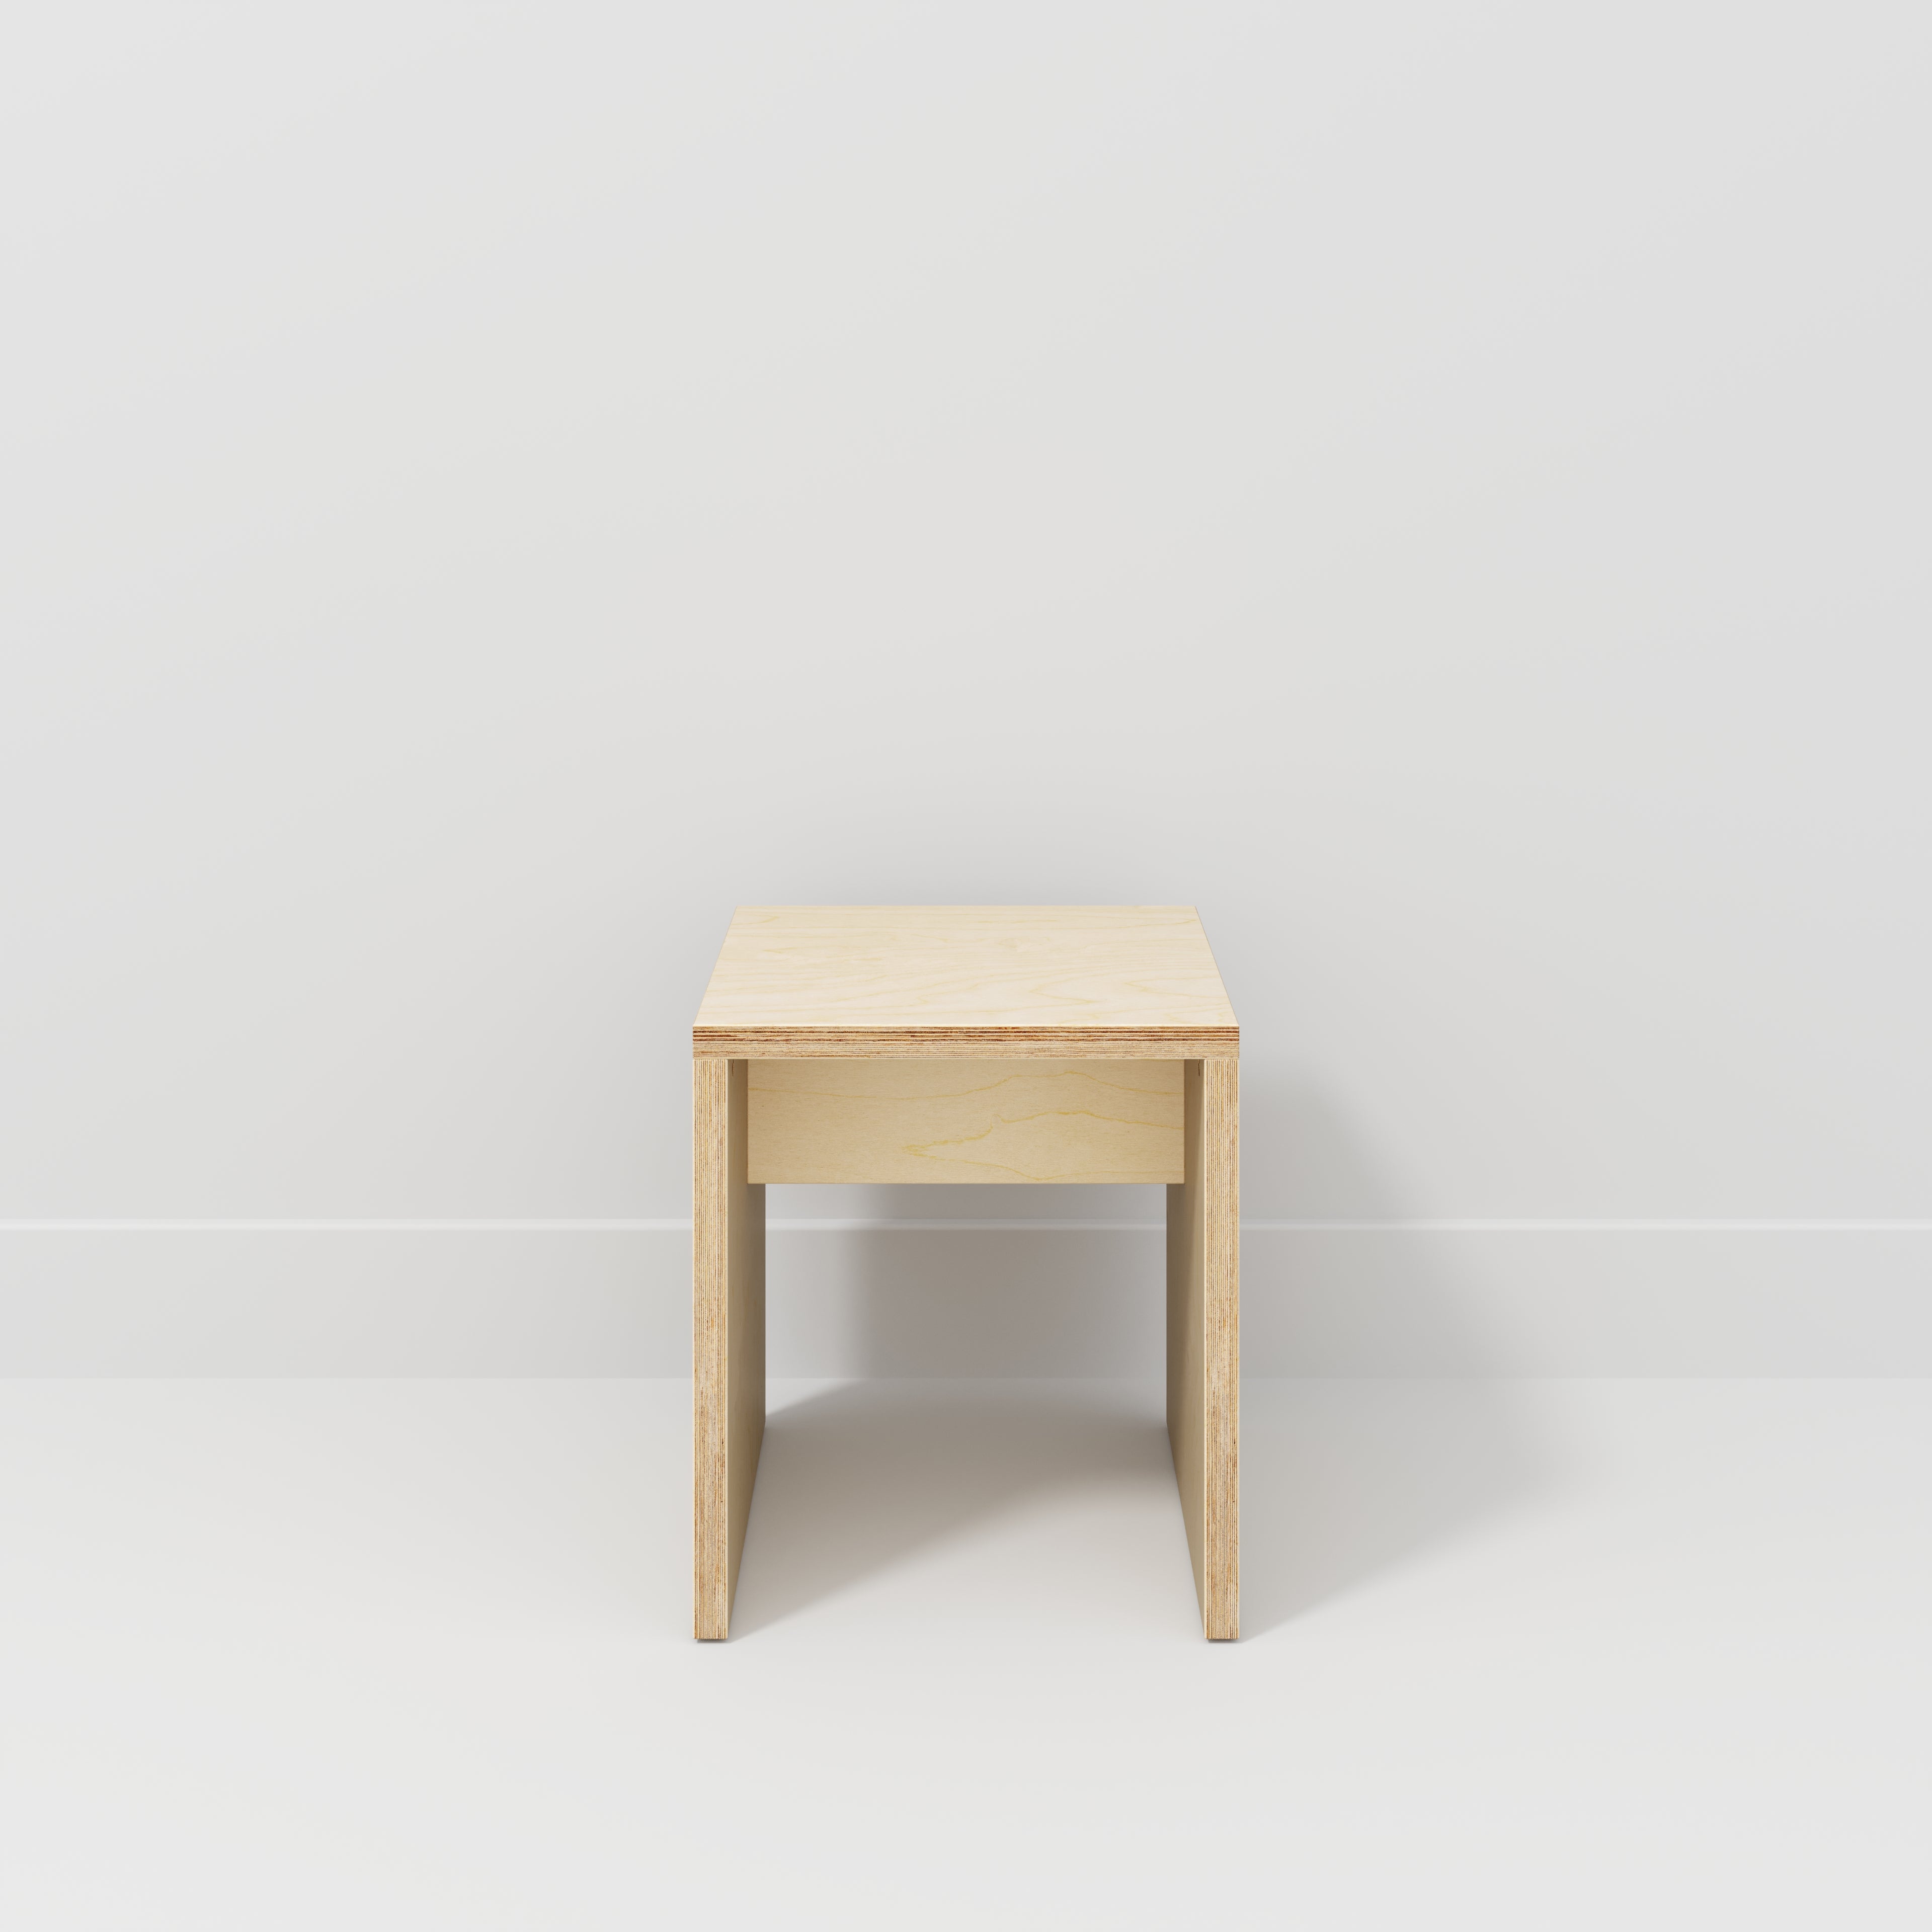 Stool with Solid Sides - Plywood Birch - 400(w) x 400(d) x 450(h)